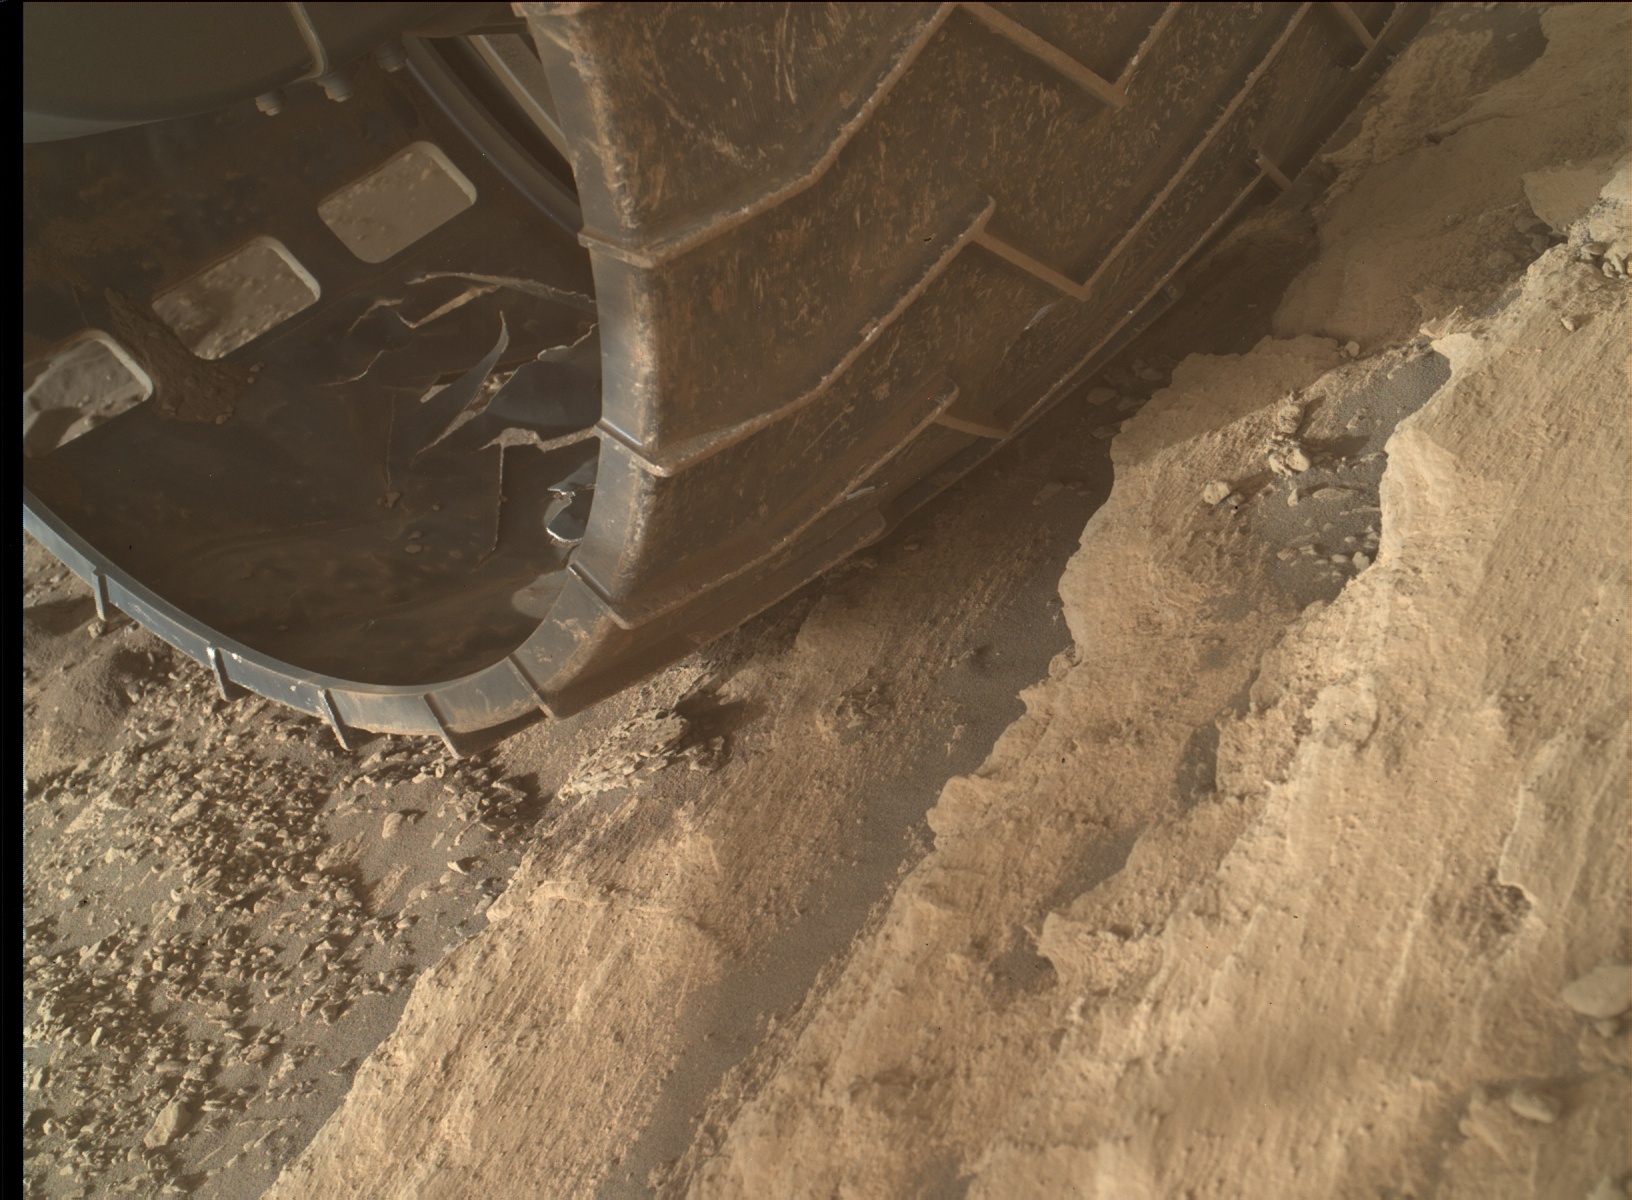 Nasa's Mars rover Curiosity acquired this image using its Mars Hand Lens Imager (MAHLI) on Sol 2583